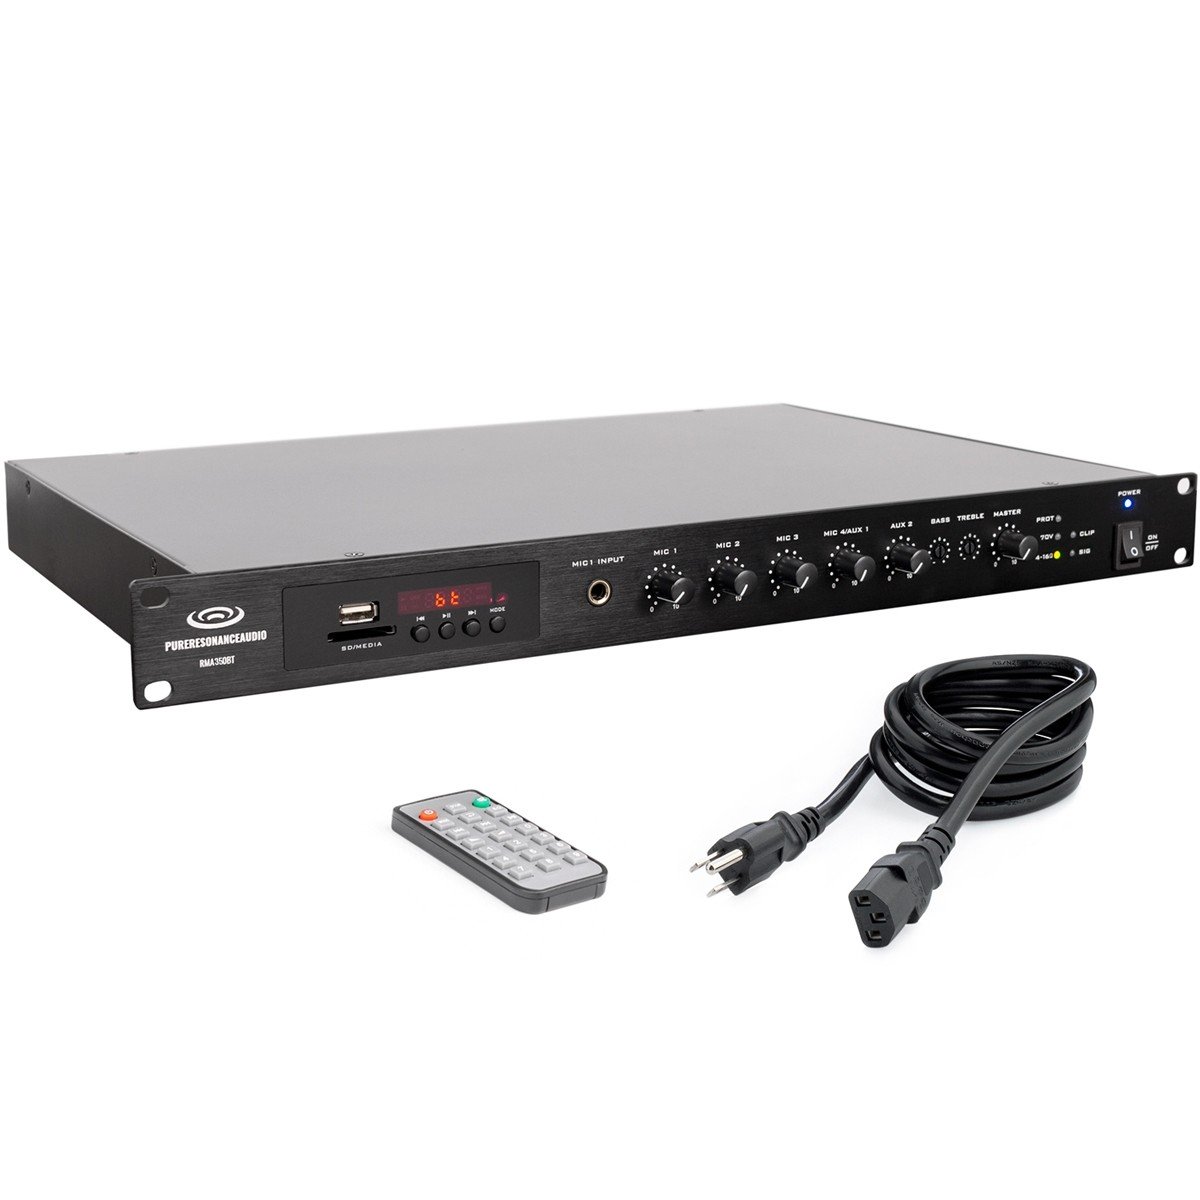 Pure Resonance Audio RMA350BT 350 Watt Commercial Rack Mount Mixer Amplifier with Bluetooth, Remote Control and Power Cord